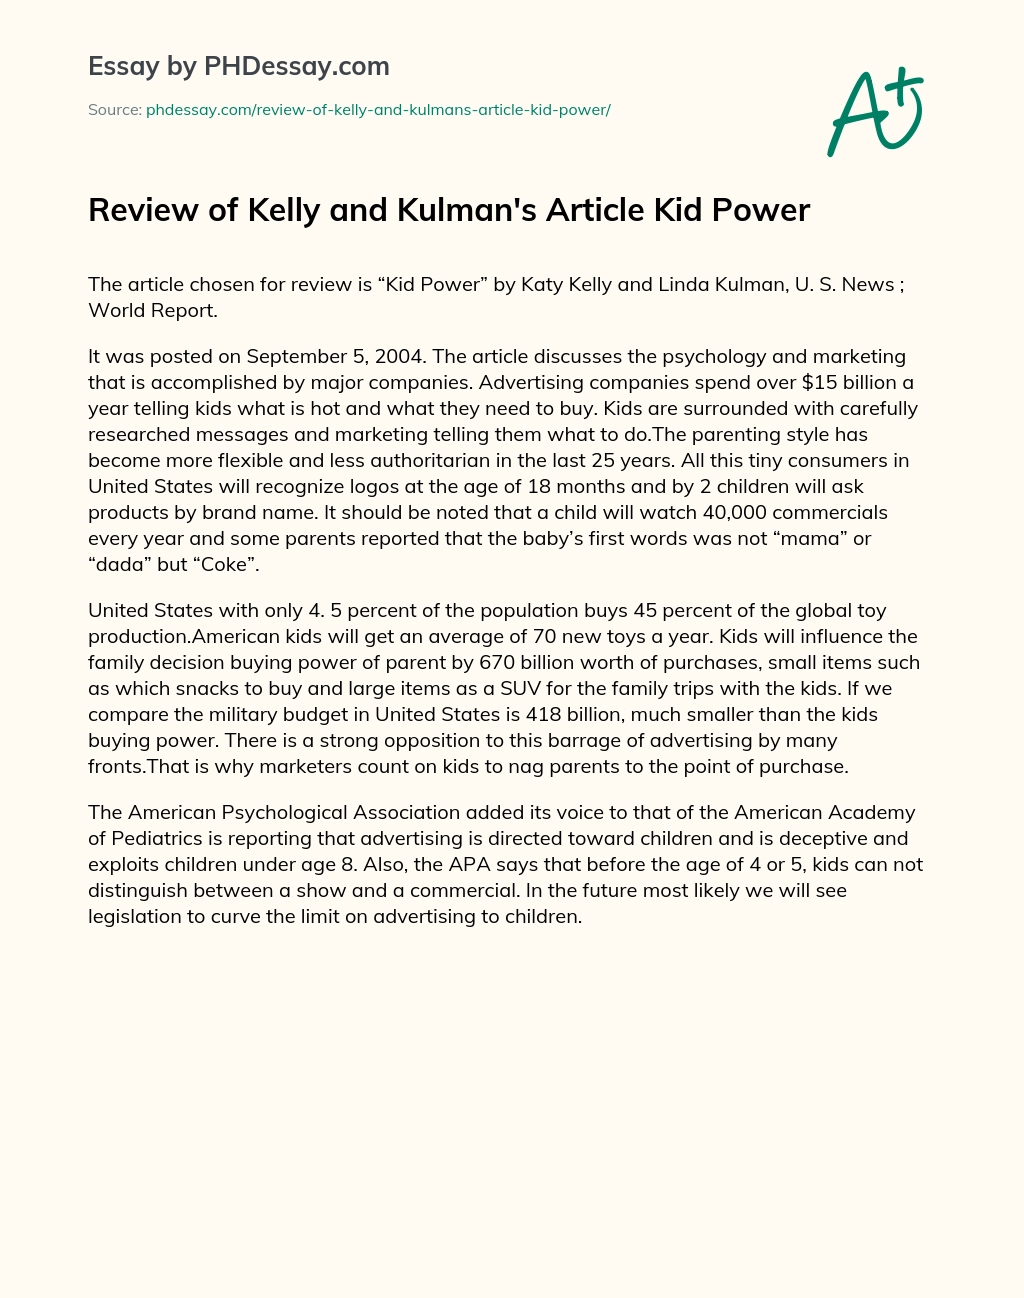 Review of Kelly and Kulman’s Article Kid Power essay